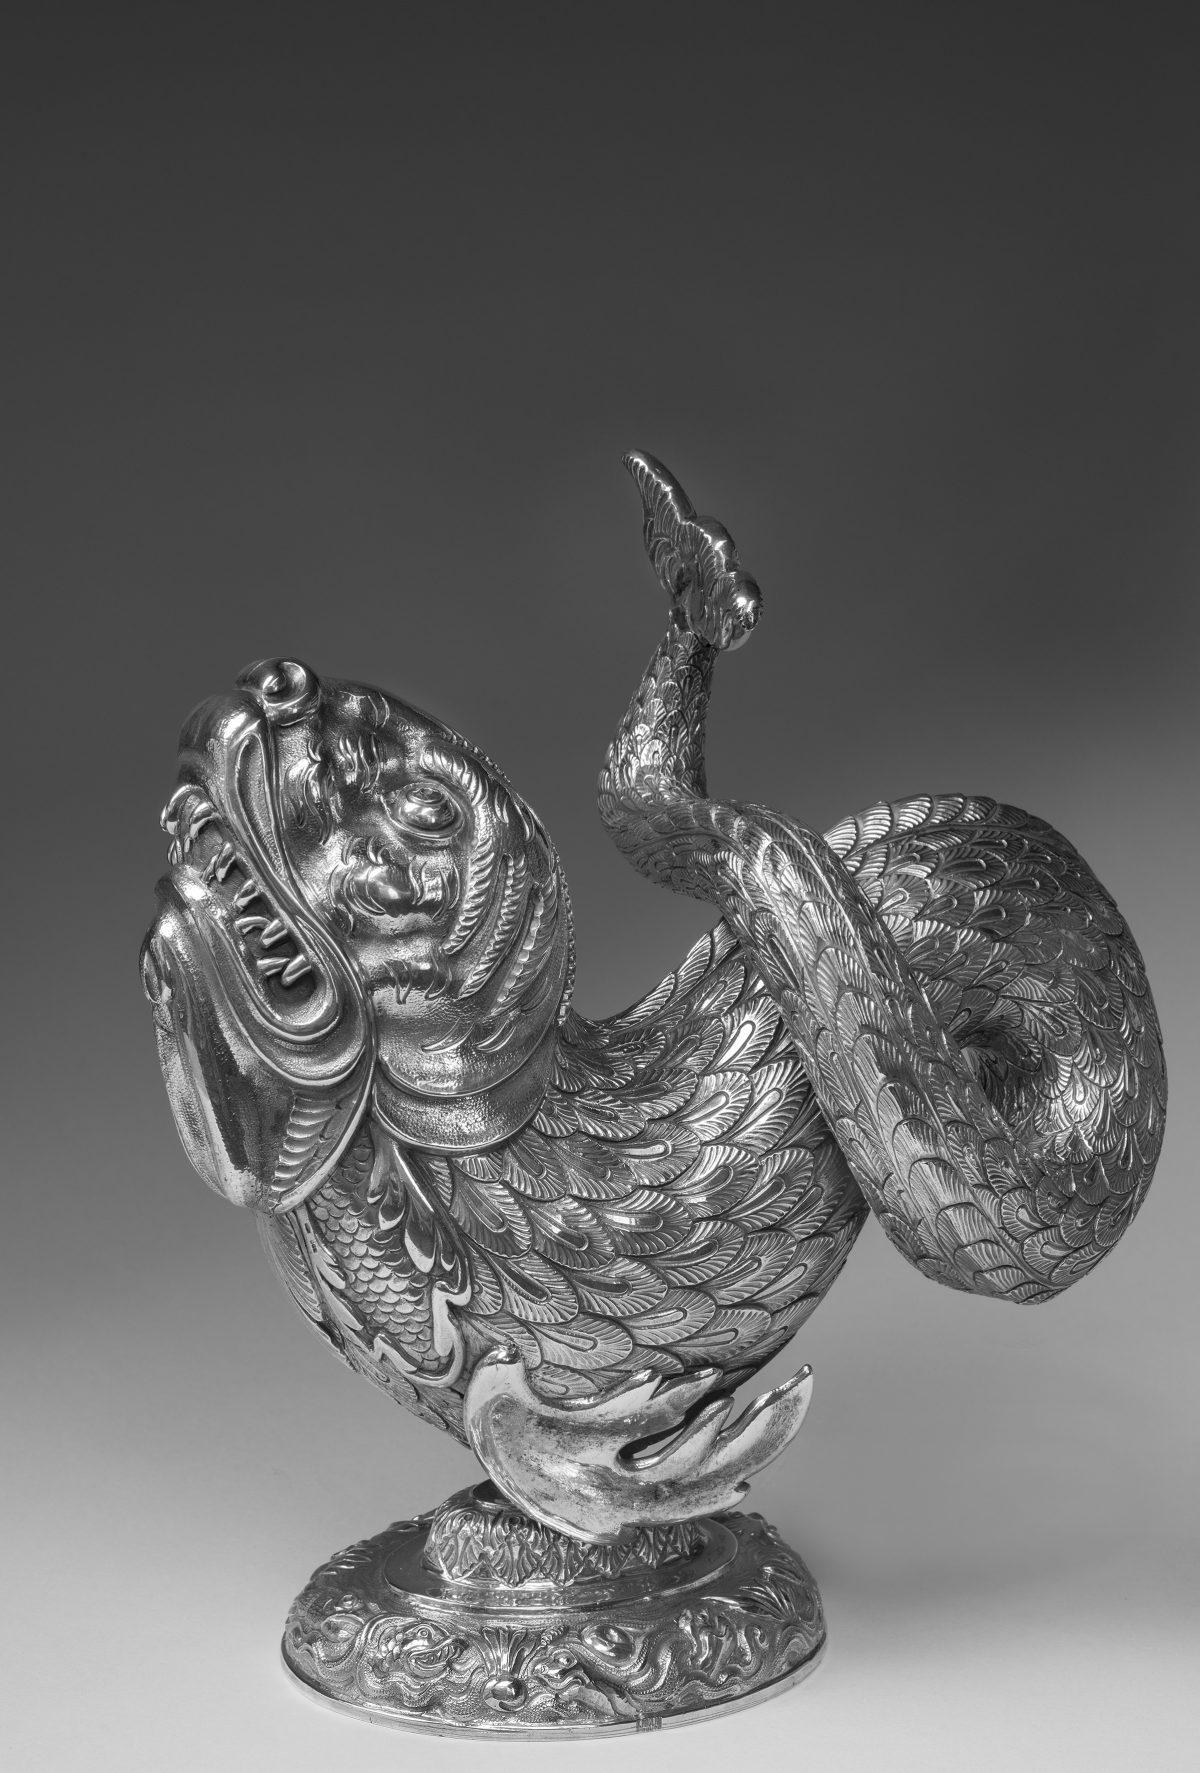 An Argentiere Pagliai dolphin inspired by a 17th-century German pitcher. The original is in the Silver Museum at the Pitti Palace in Florence, Italy. (Lorenzo Michelini/Argentiere Pagliai)